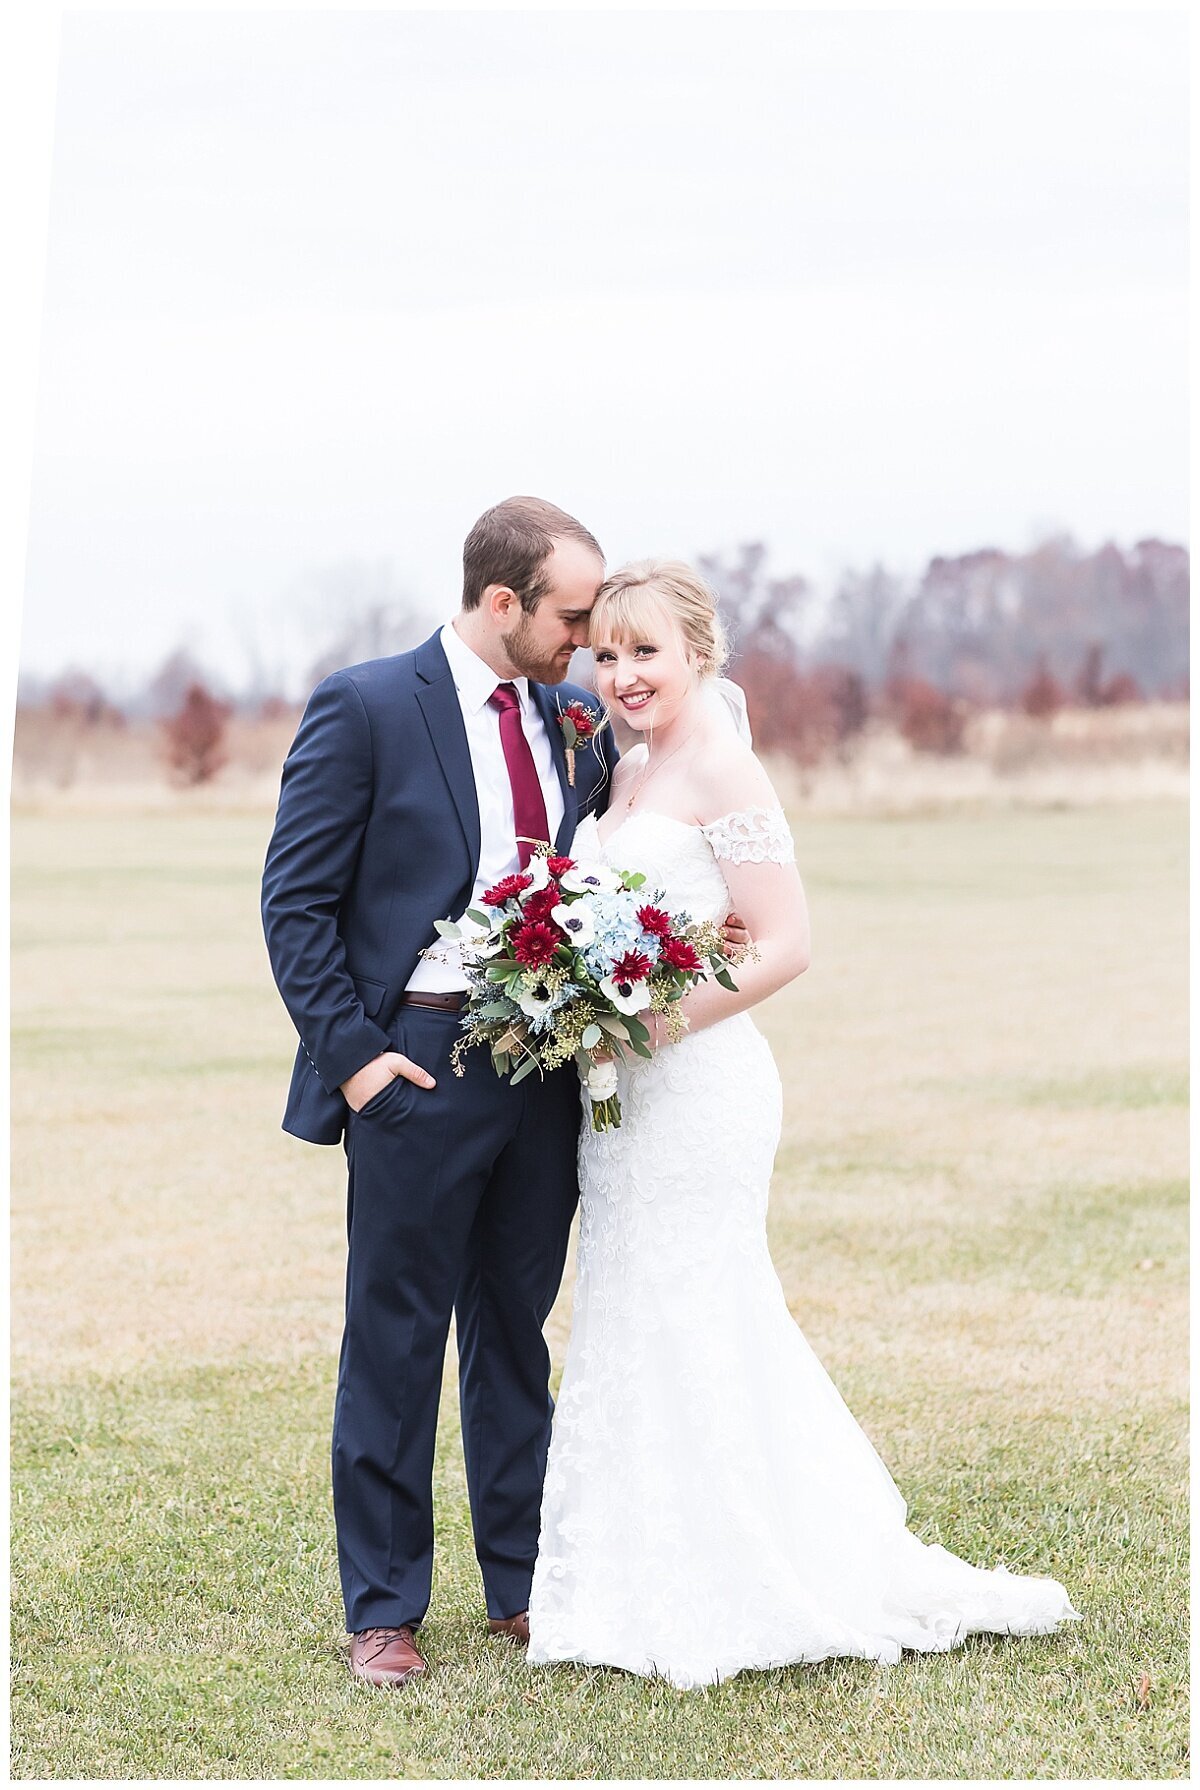 Magical Winter Wedding photo by Simply Seeking Photography_1173